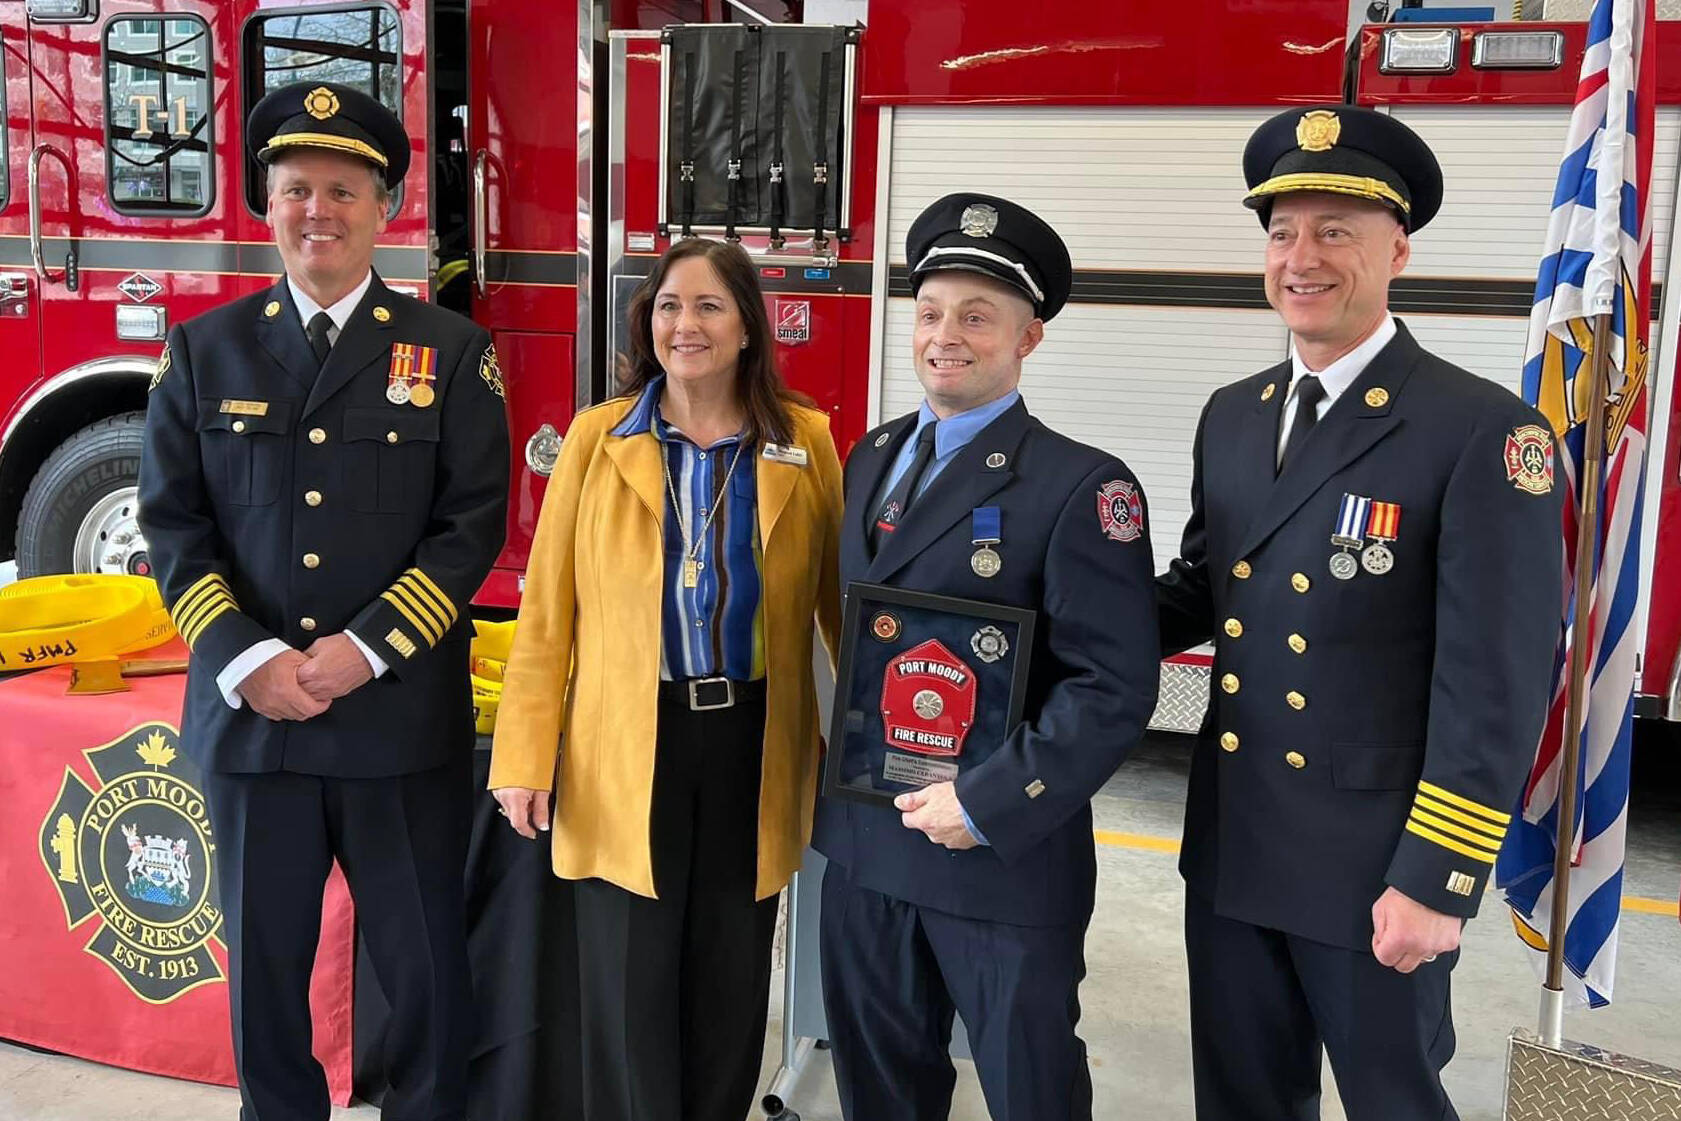 Port Moody Fire Rescue honoured Massimo Cerantola yesterday May 25 with a Medal of Merit. PortMoodyFireRescue@PortMoodyFR photo